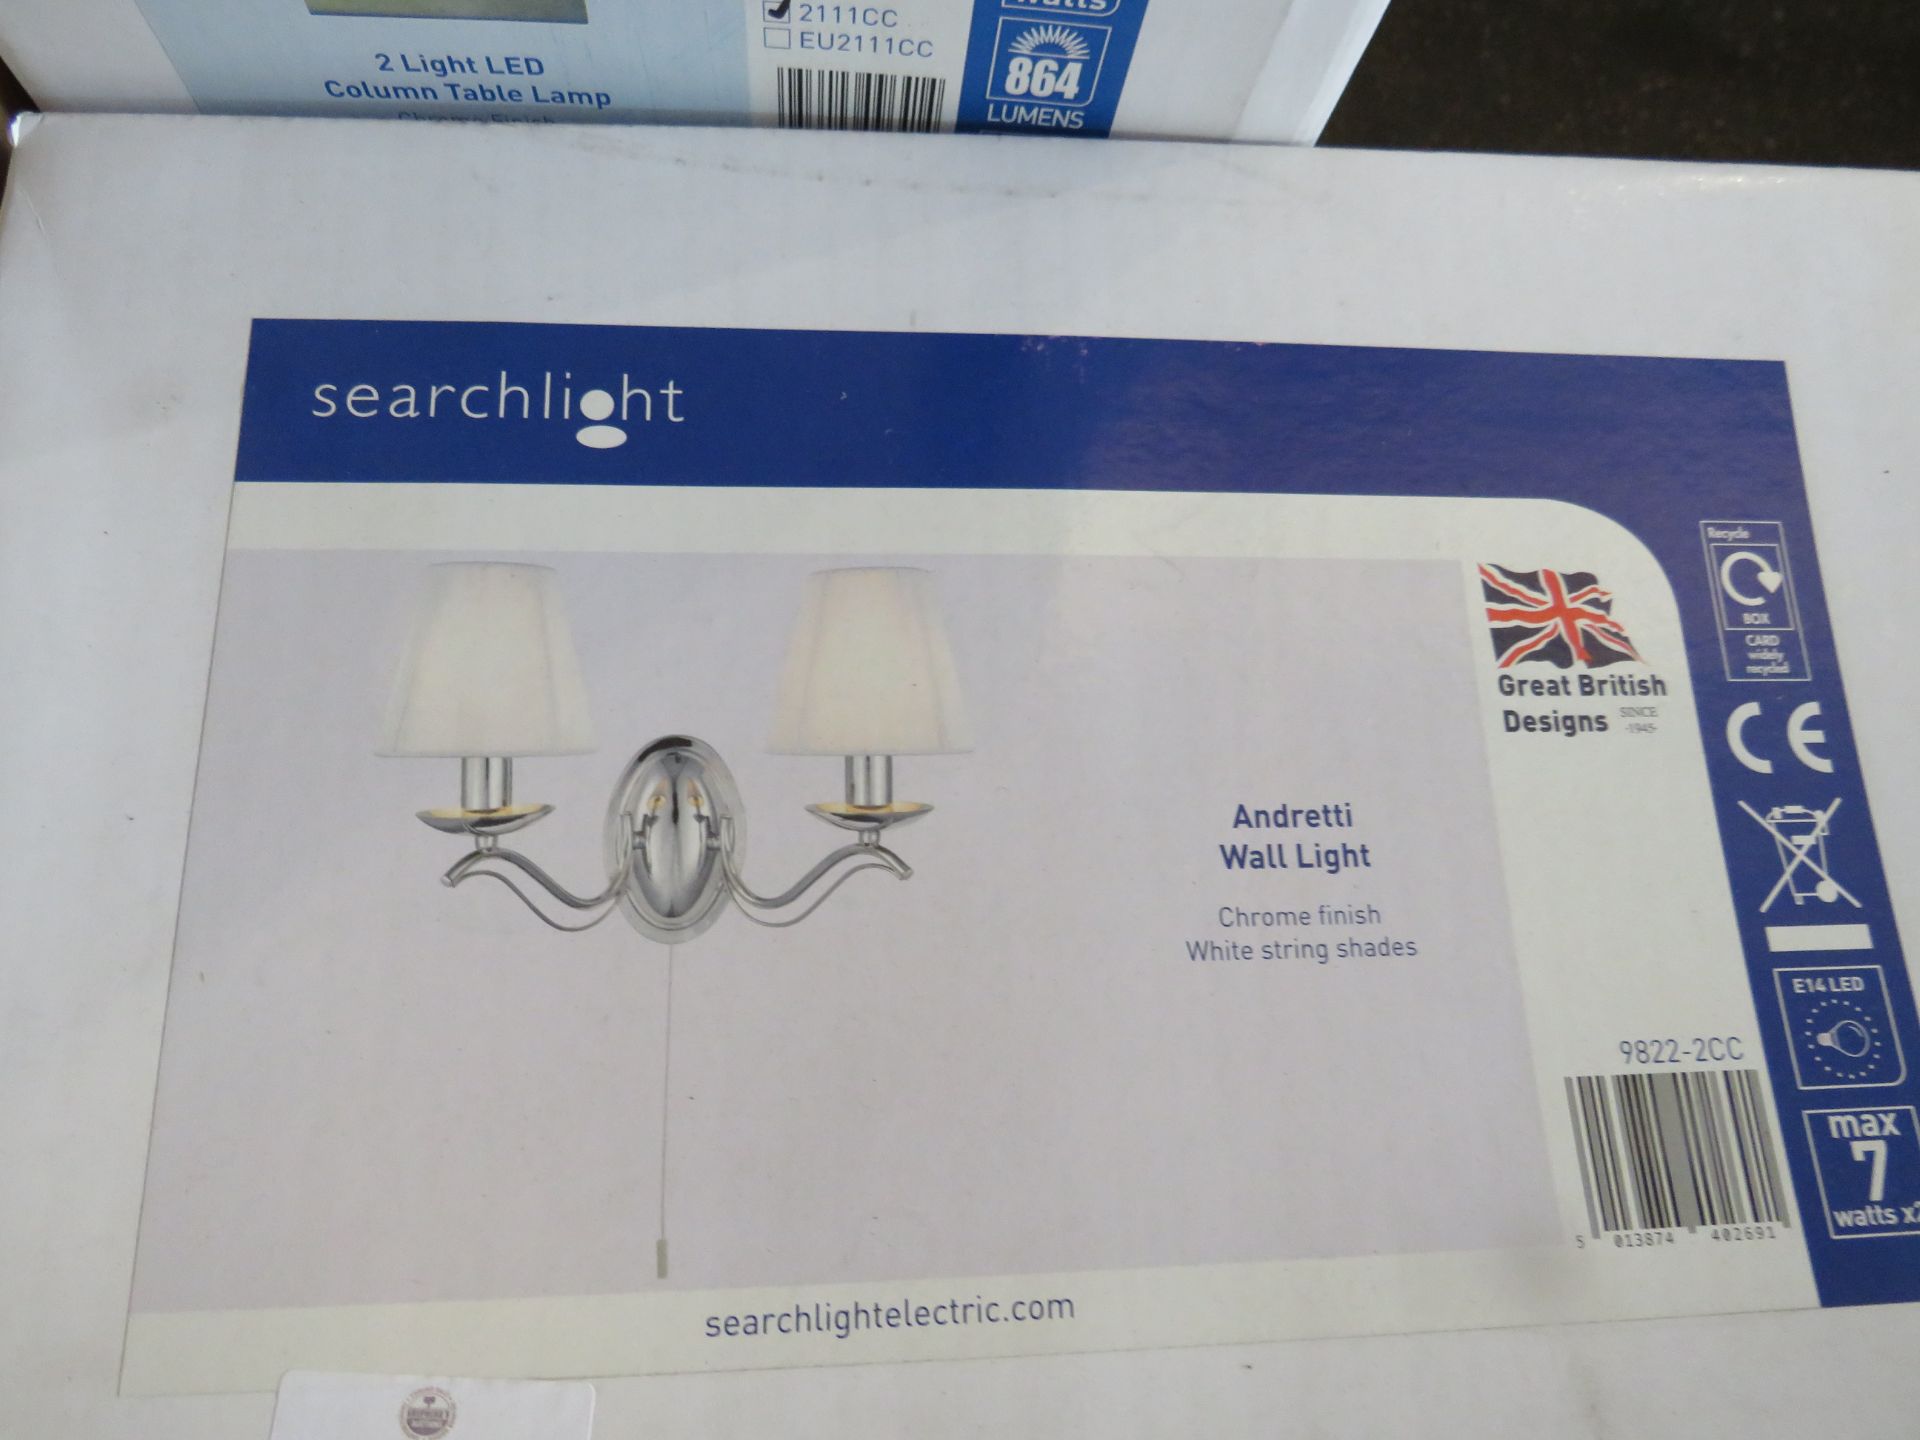 Searchlight Andretti - 2lt Wall Bracket Chrome White String Shades RRP “?40.00 - This lot contains